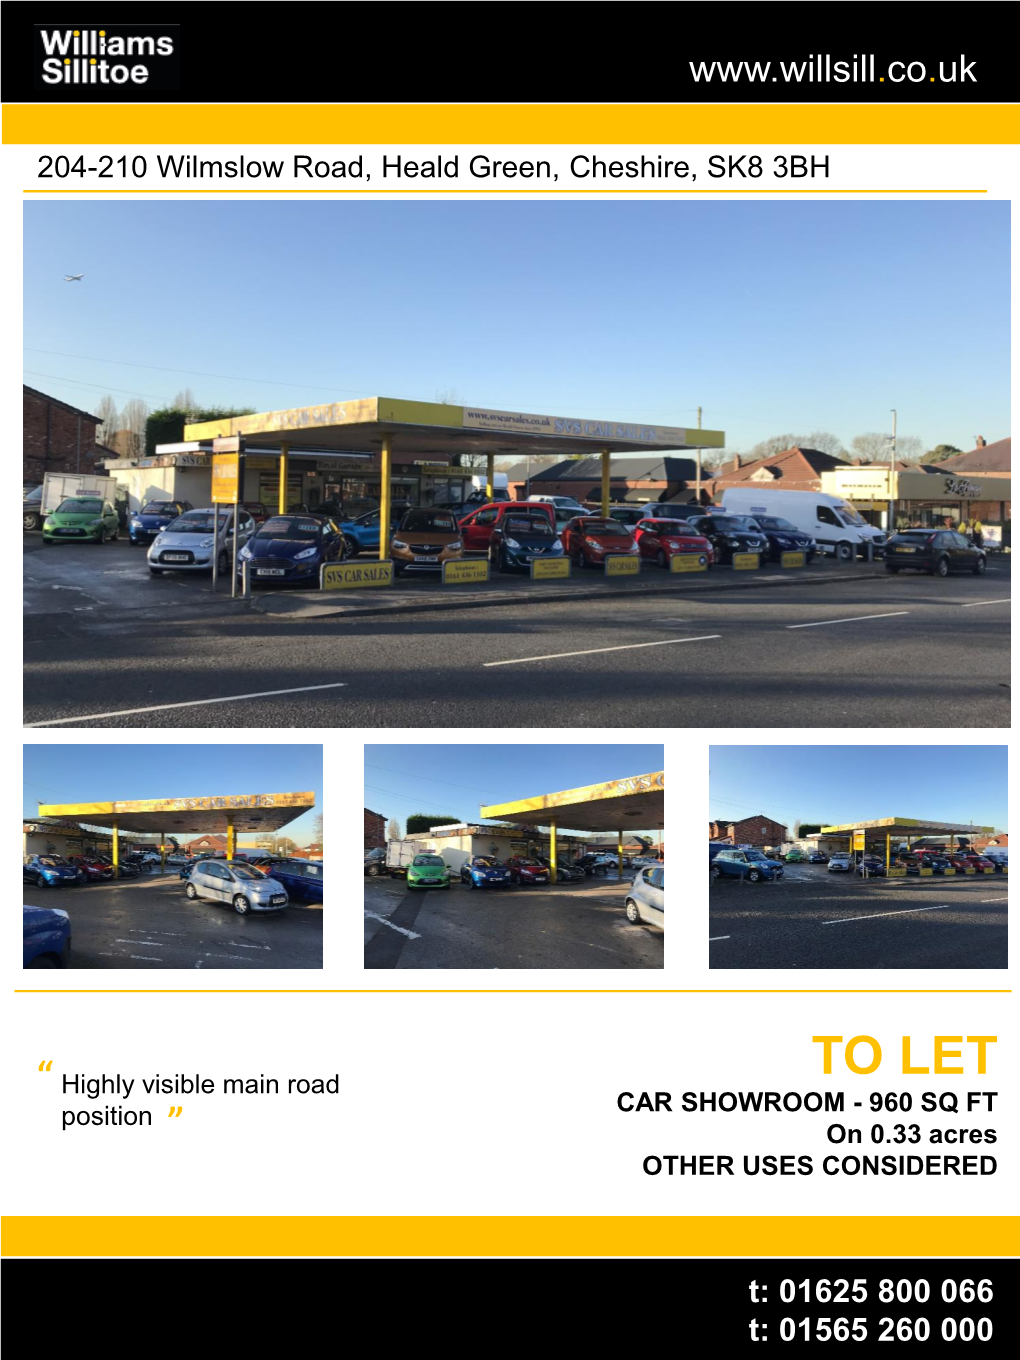 204-210 Wilmslow Road, Heald Green, Cheshire, SK8 3BH “ to LET “ Highly Visible Main Road CAR SHOWROOM - 960 SQ FT Position on 0.33 Acres OTHER USES CONSIDERED